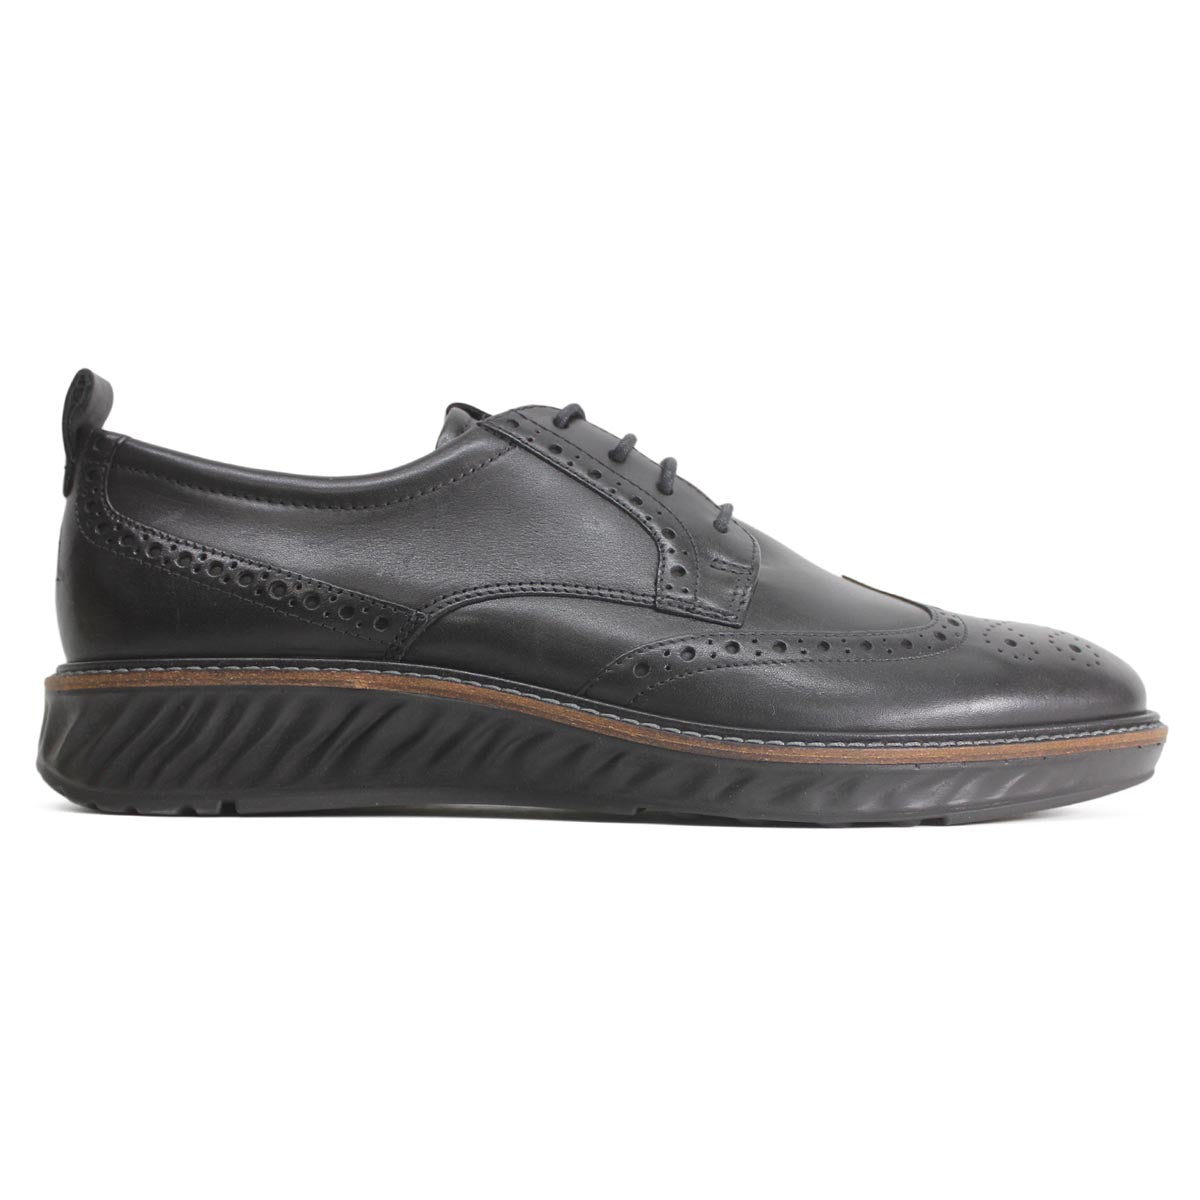 Ecco Mens Shoes St 1 Hybrid 836424 Casual Lace-Up Low-Profile Leather - UK 10